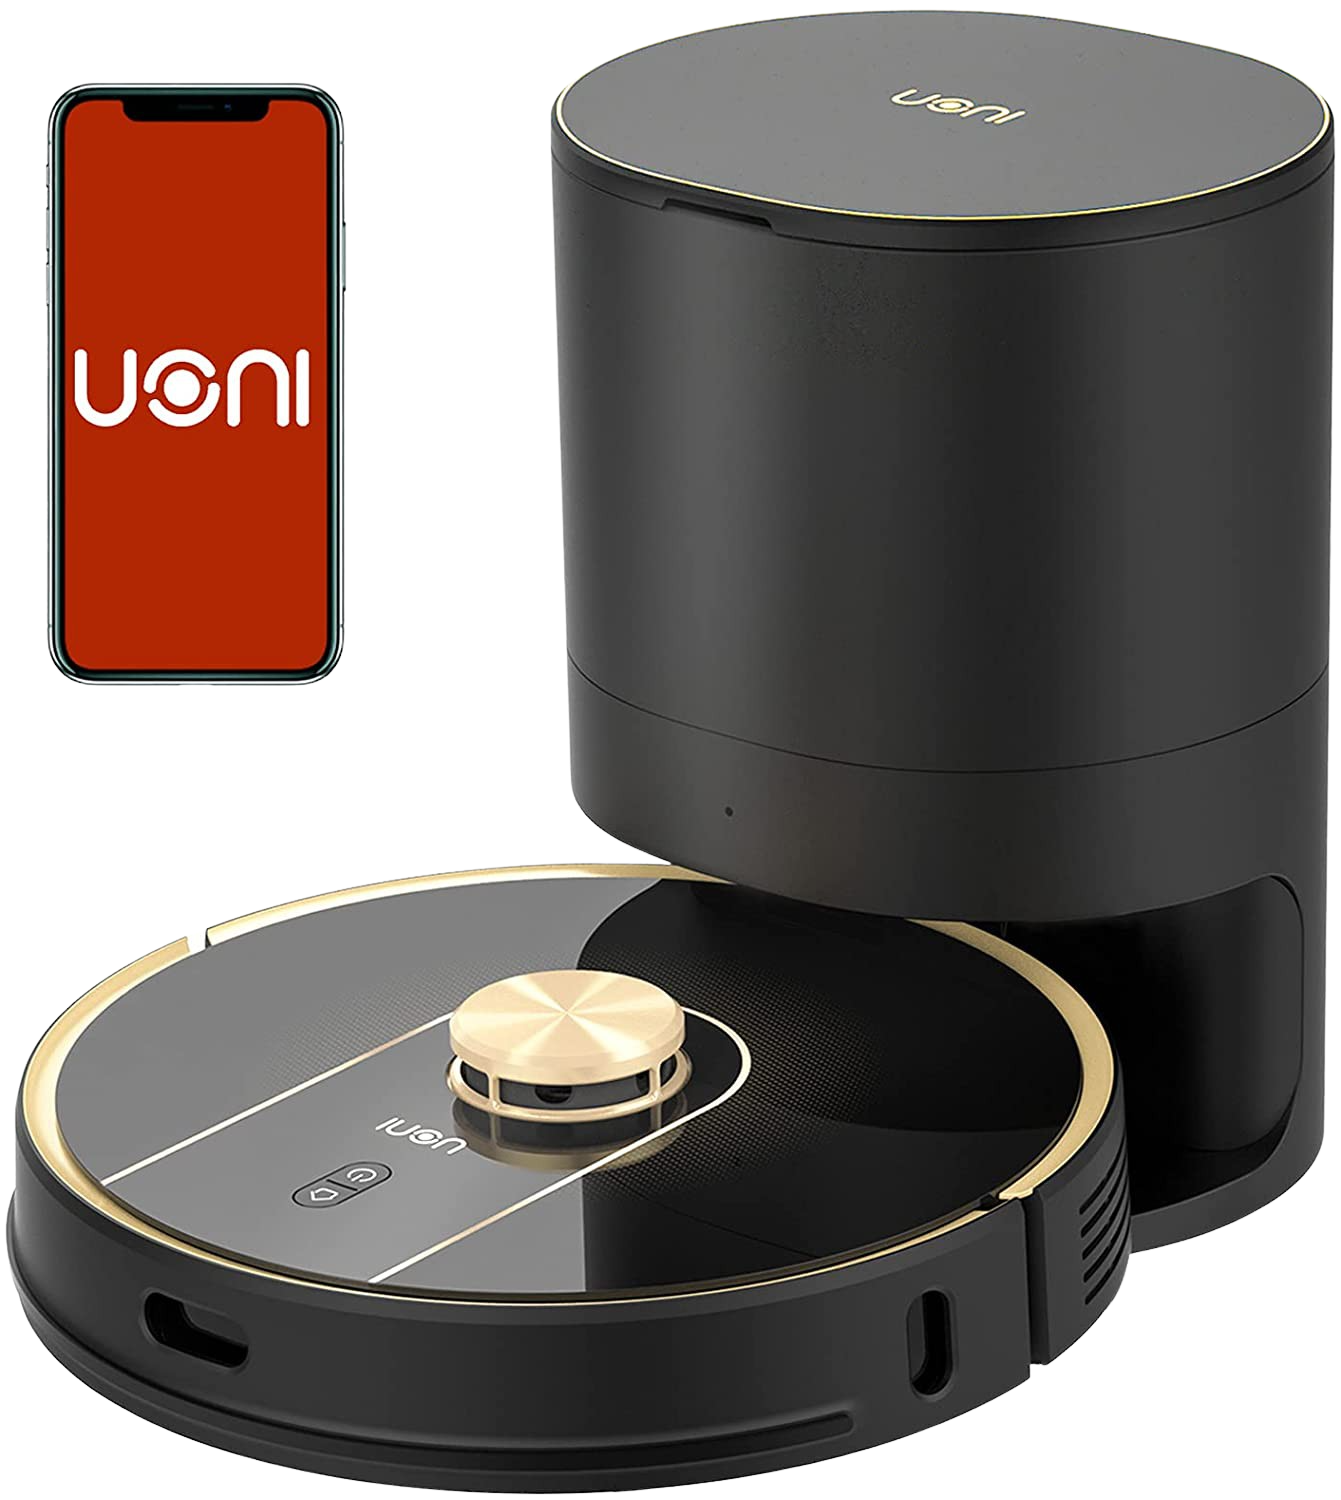 Uoni, Uoni V980 Plus Robot Vacuum Cleaner with Self-Emptying Dustbin New